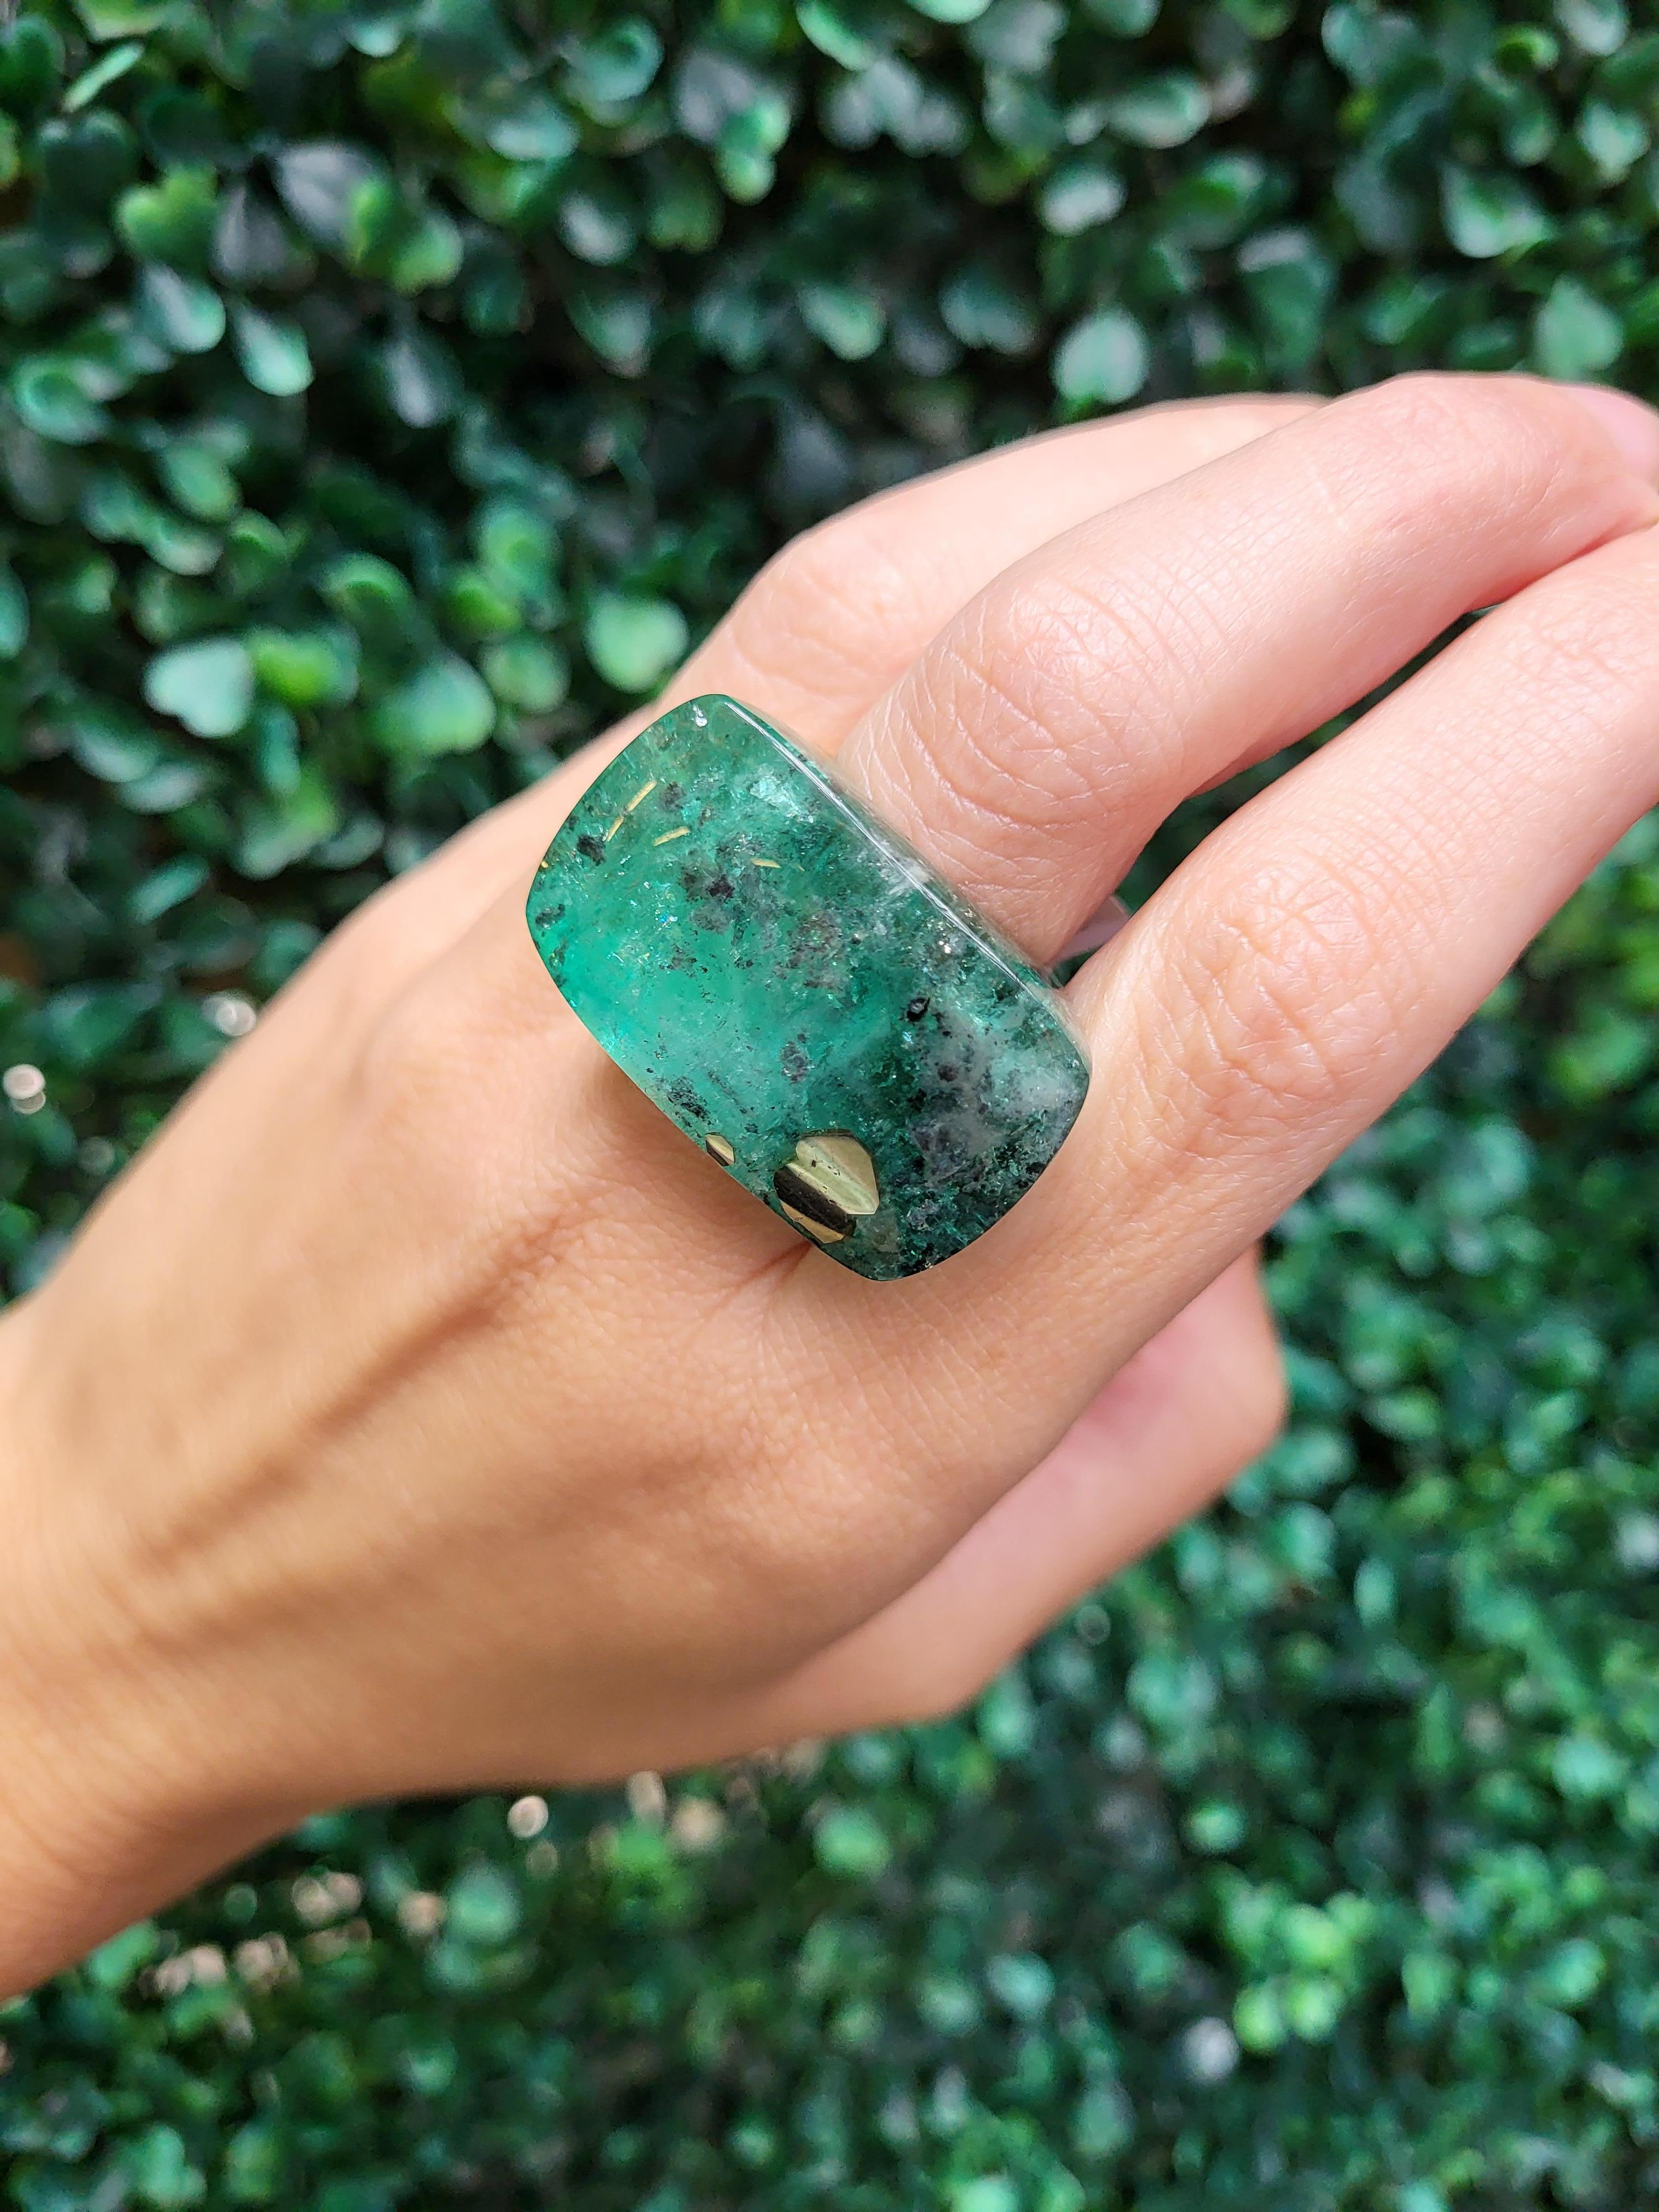 Modern 30 Carat Columbian Emerald Ring with Pyrite Inclusion For Sale